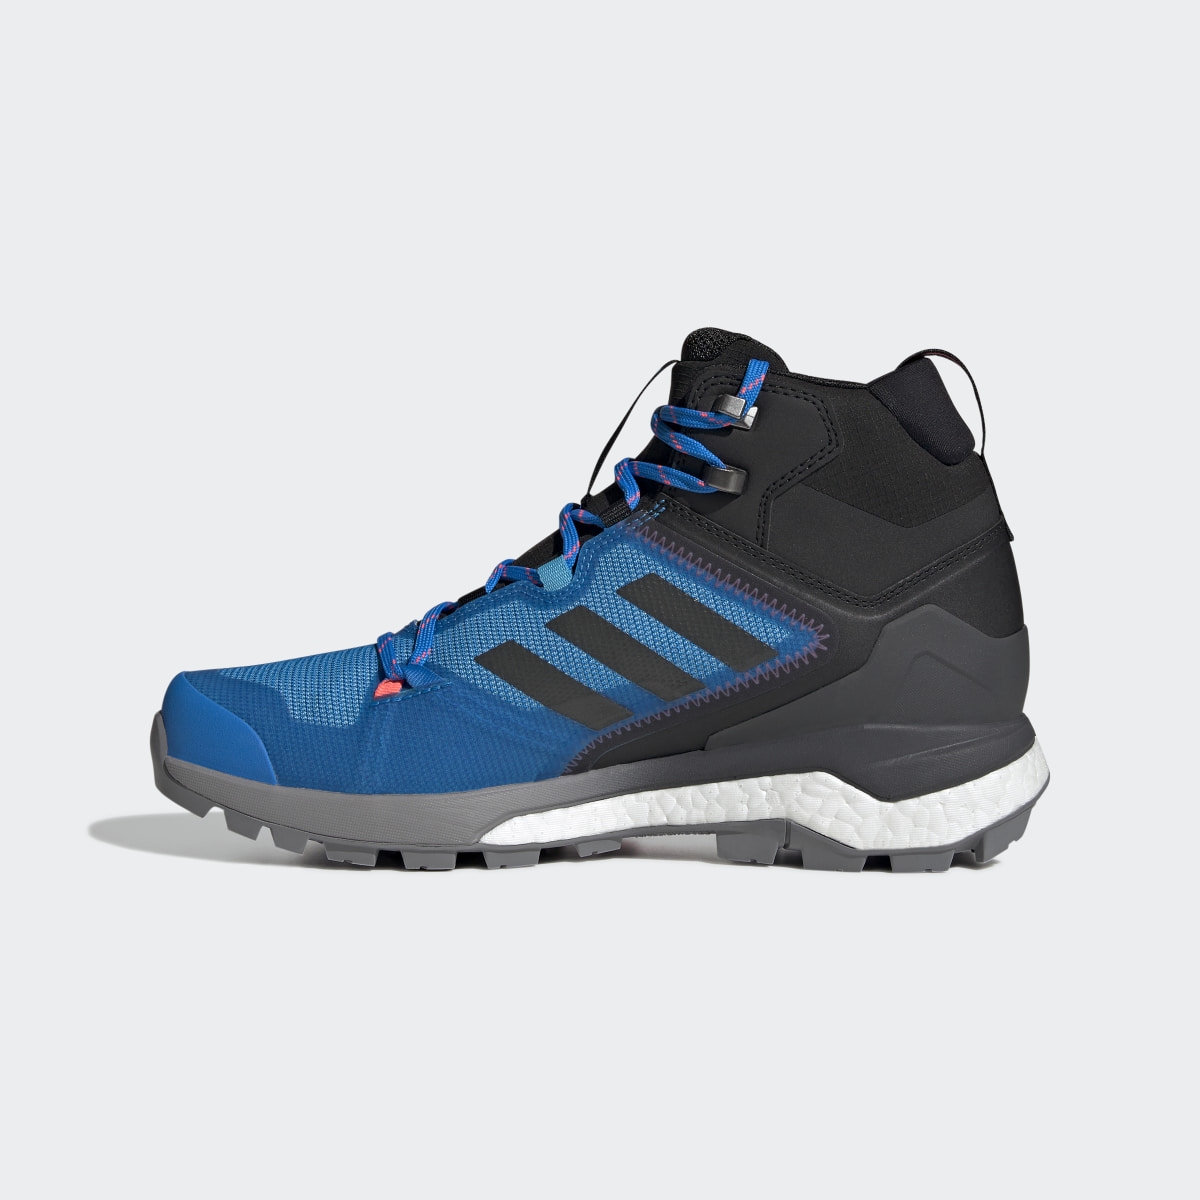 Adidas TERREX Skychaser 2 Mid GORE-TEX Hiking Shoes. 13